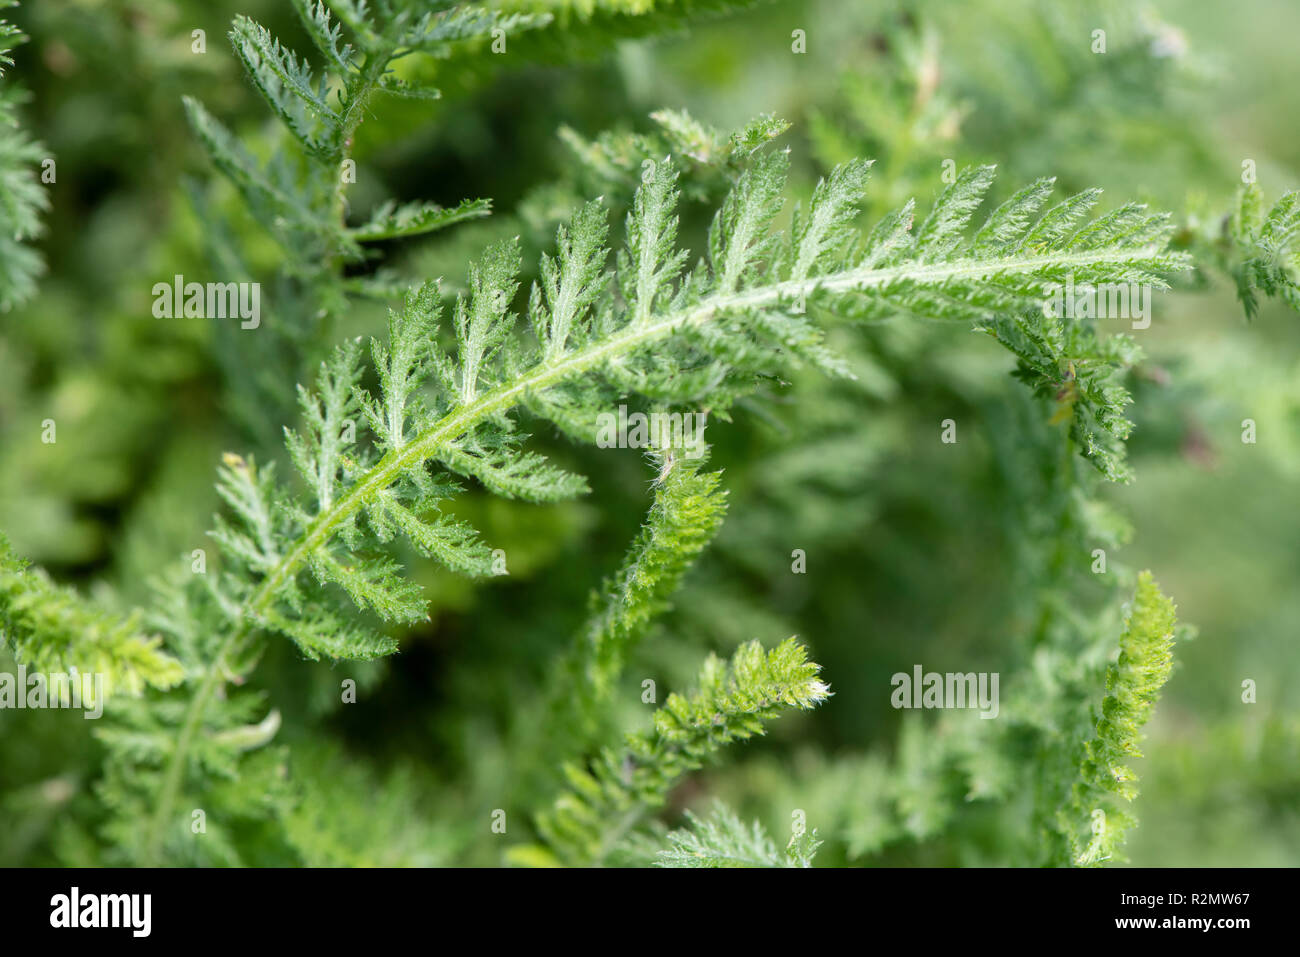 Yarrow as a medicinal plant for natural medicine and herbal medicine Stock Photo